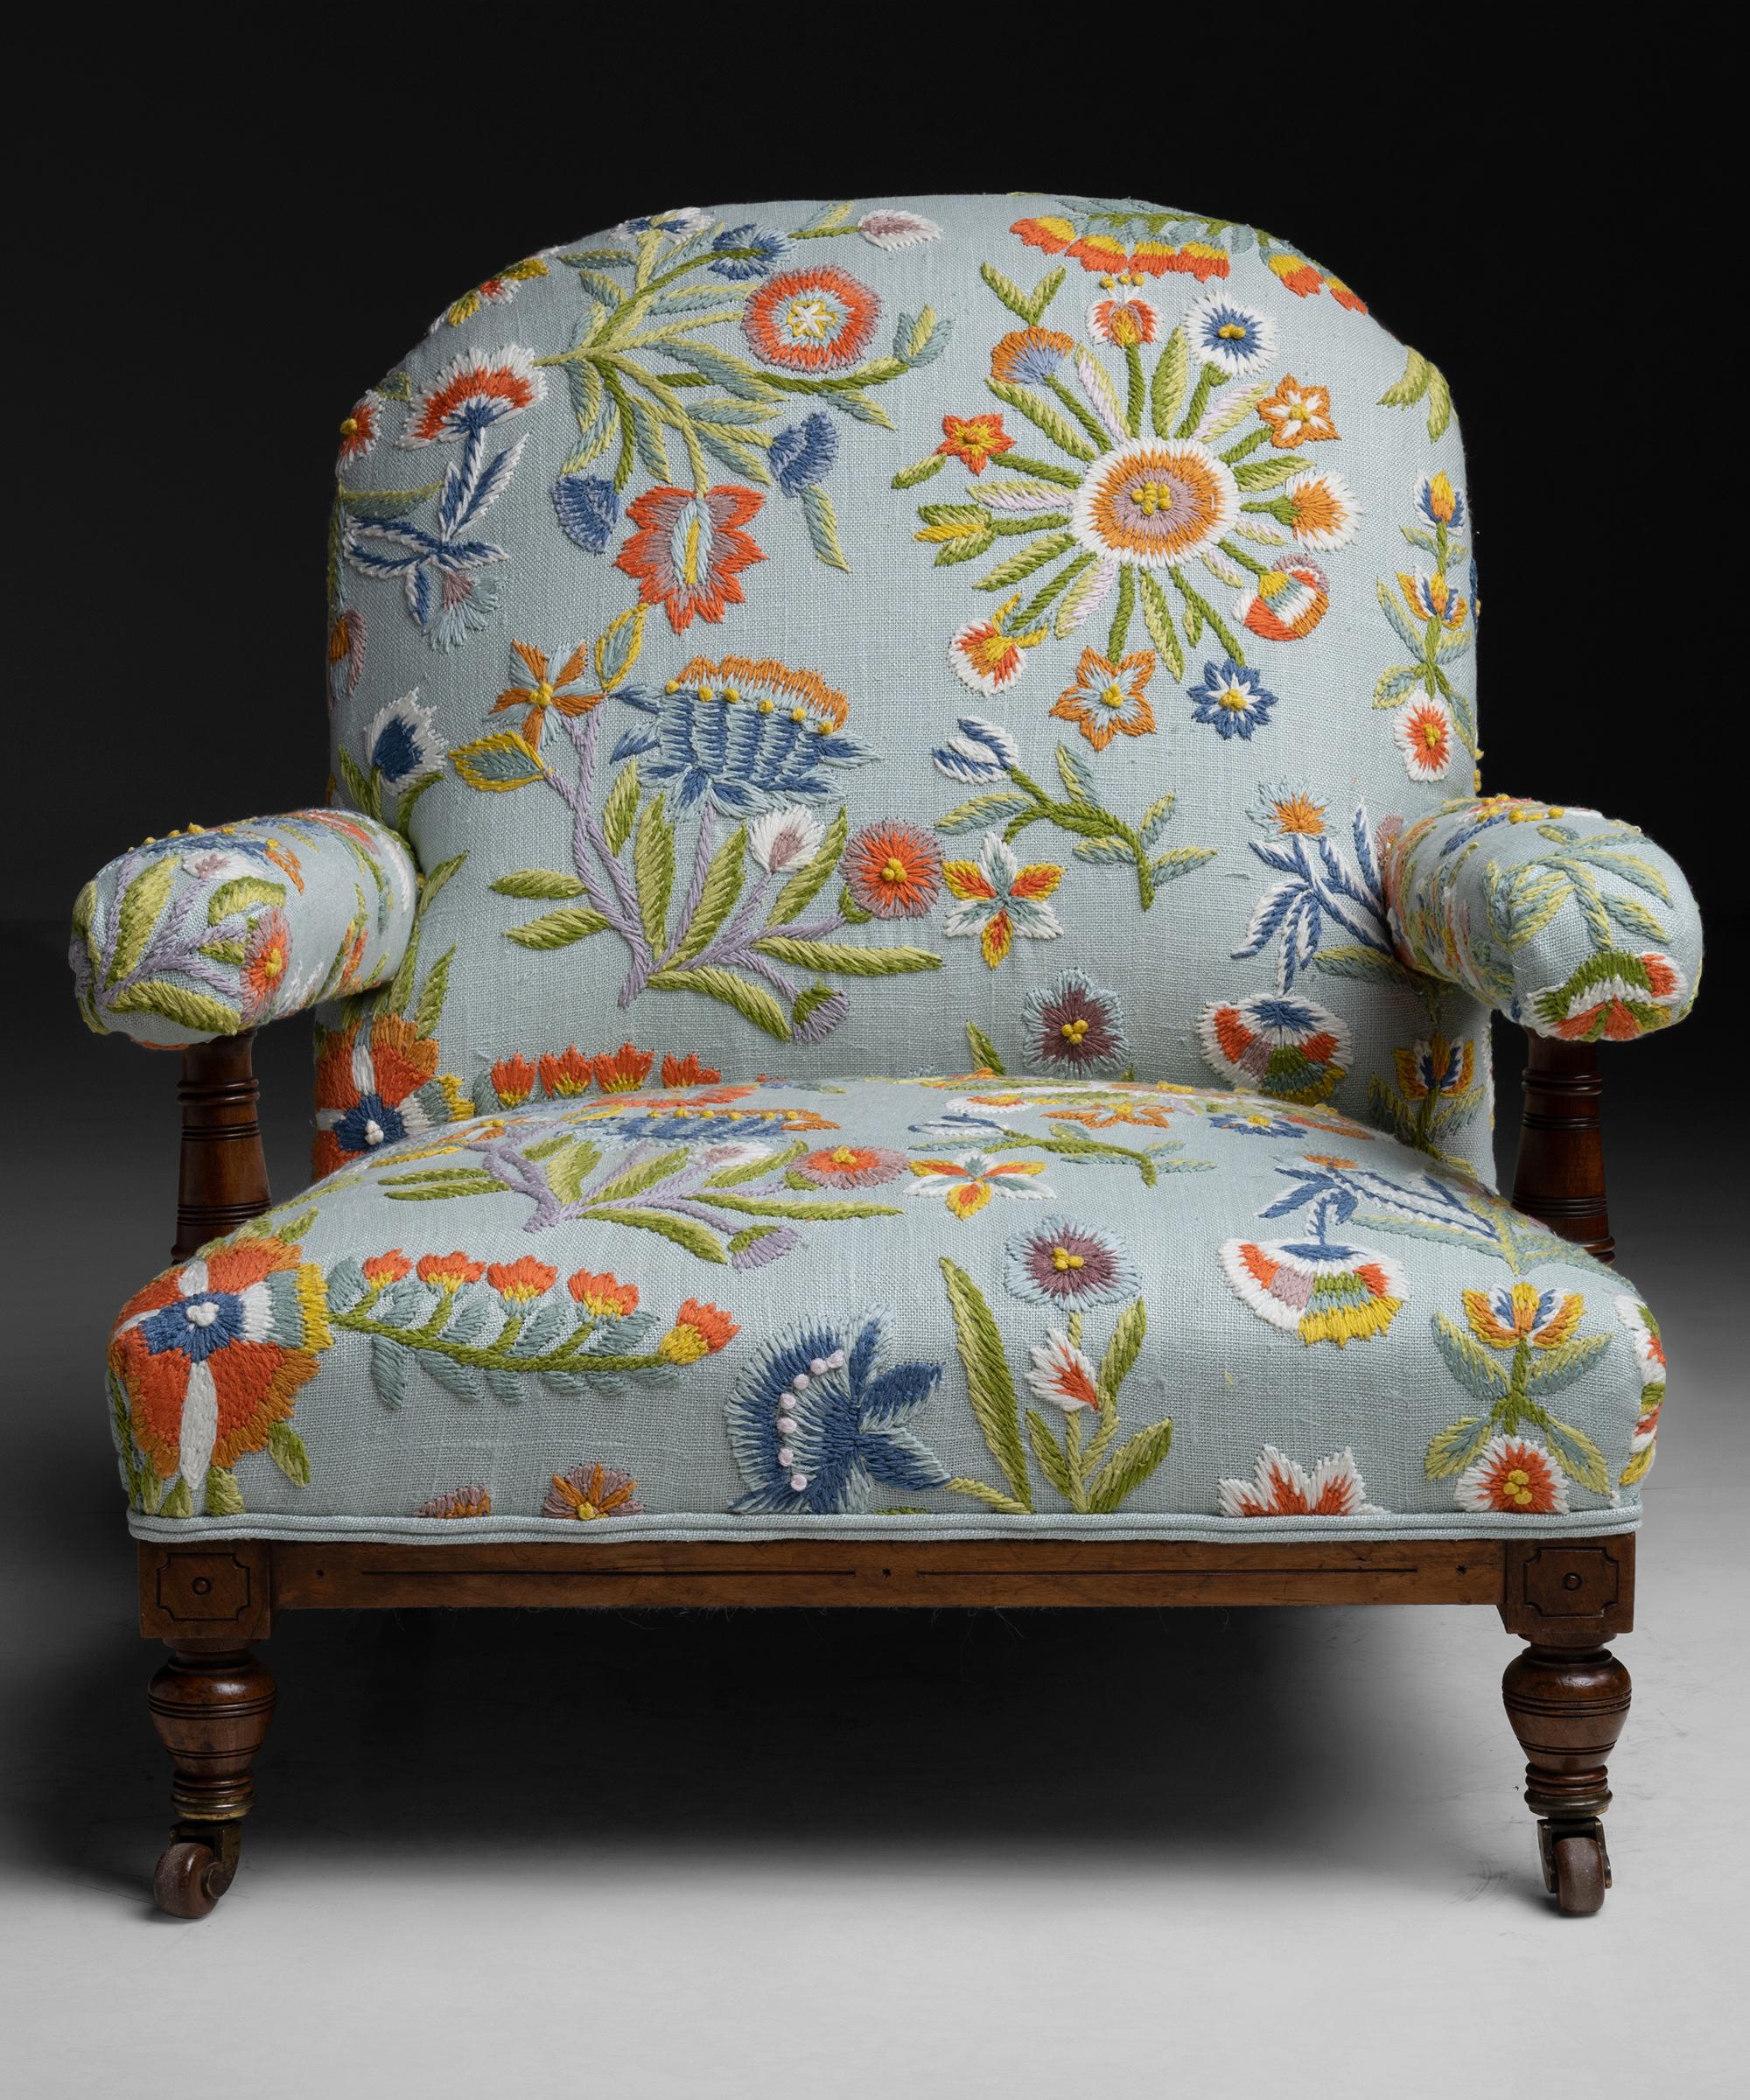 English Howard Style Open Arm Library Chair in Embroidered Fabric by Pierre Frey, c.1890